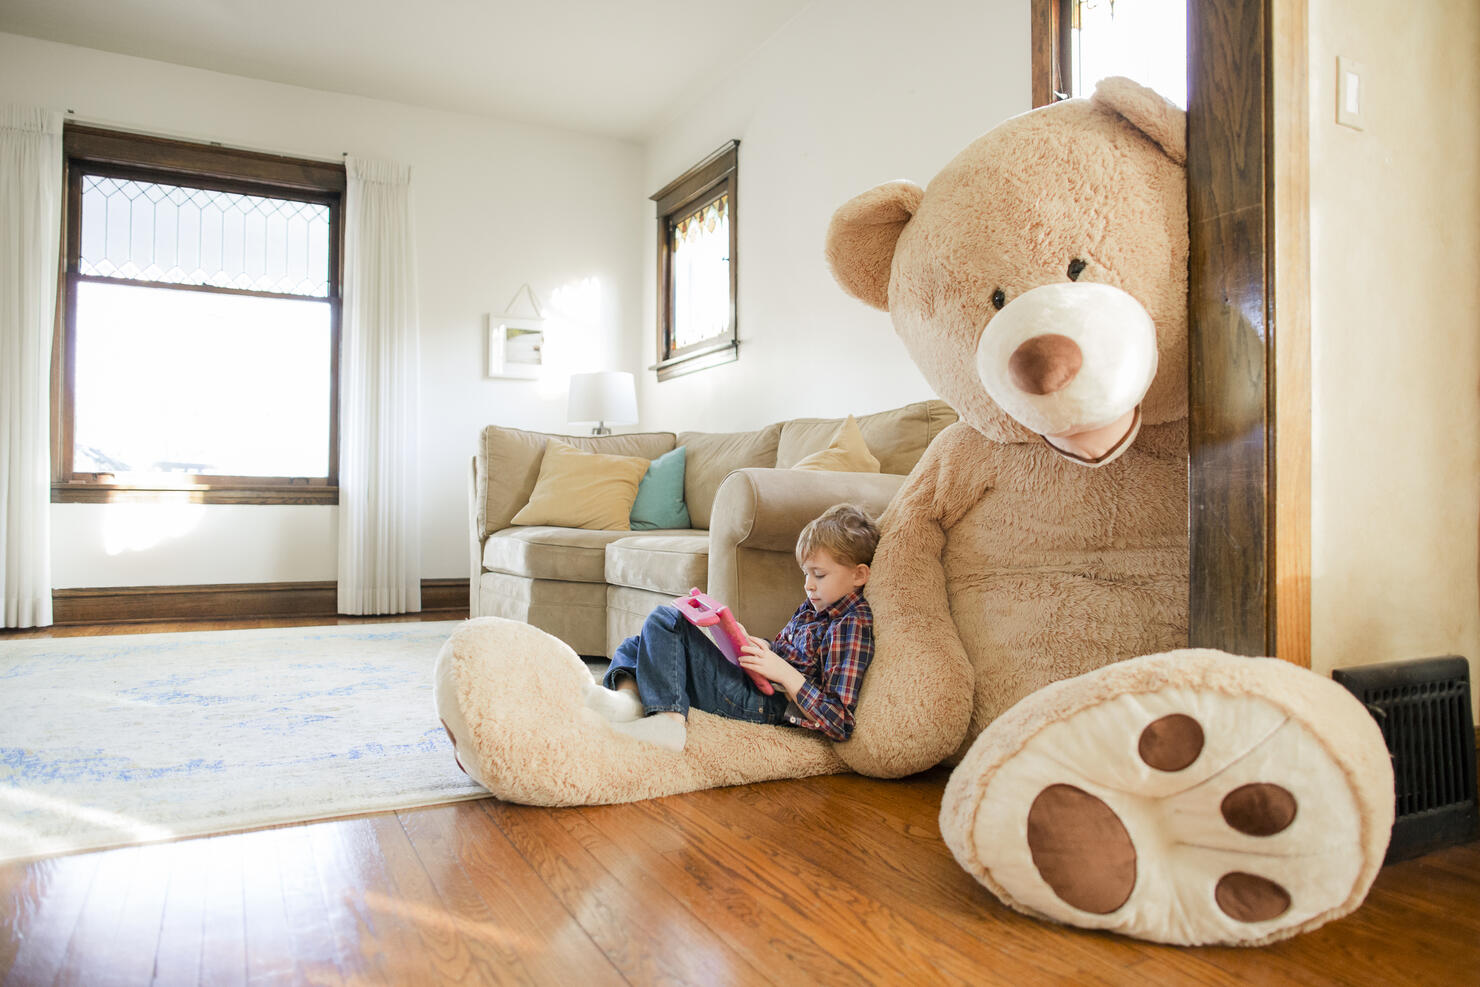 What's Inside YOUR Giant Teddy Bear?